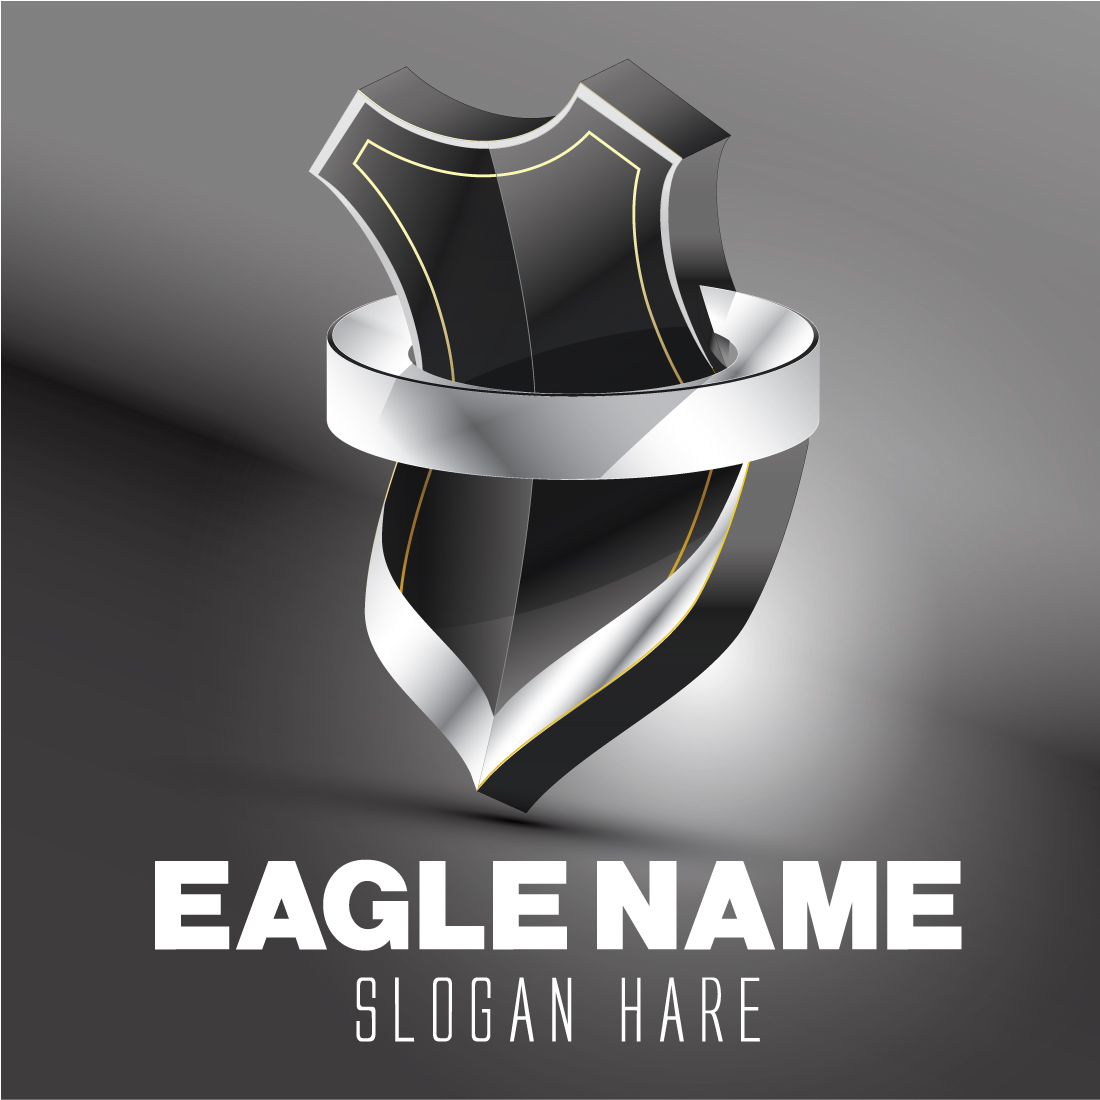 isolated shield 3D vector design Create your own text on ribbon cover image.